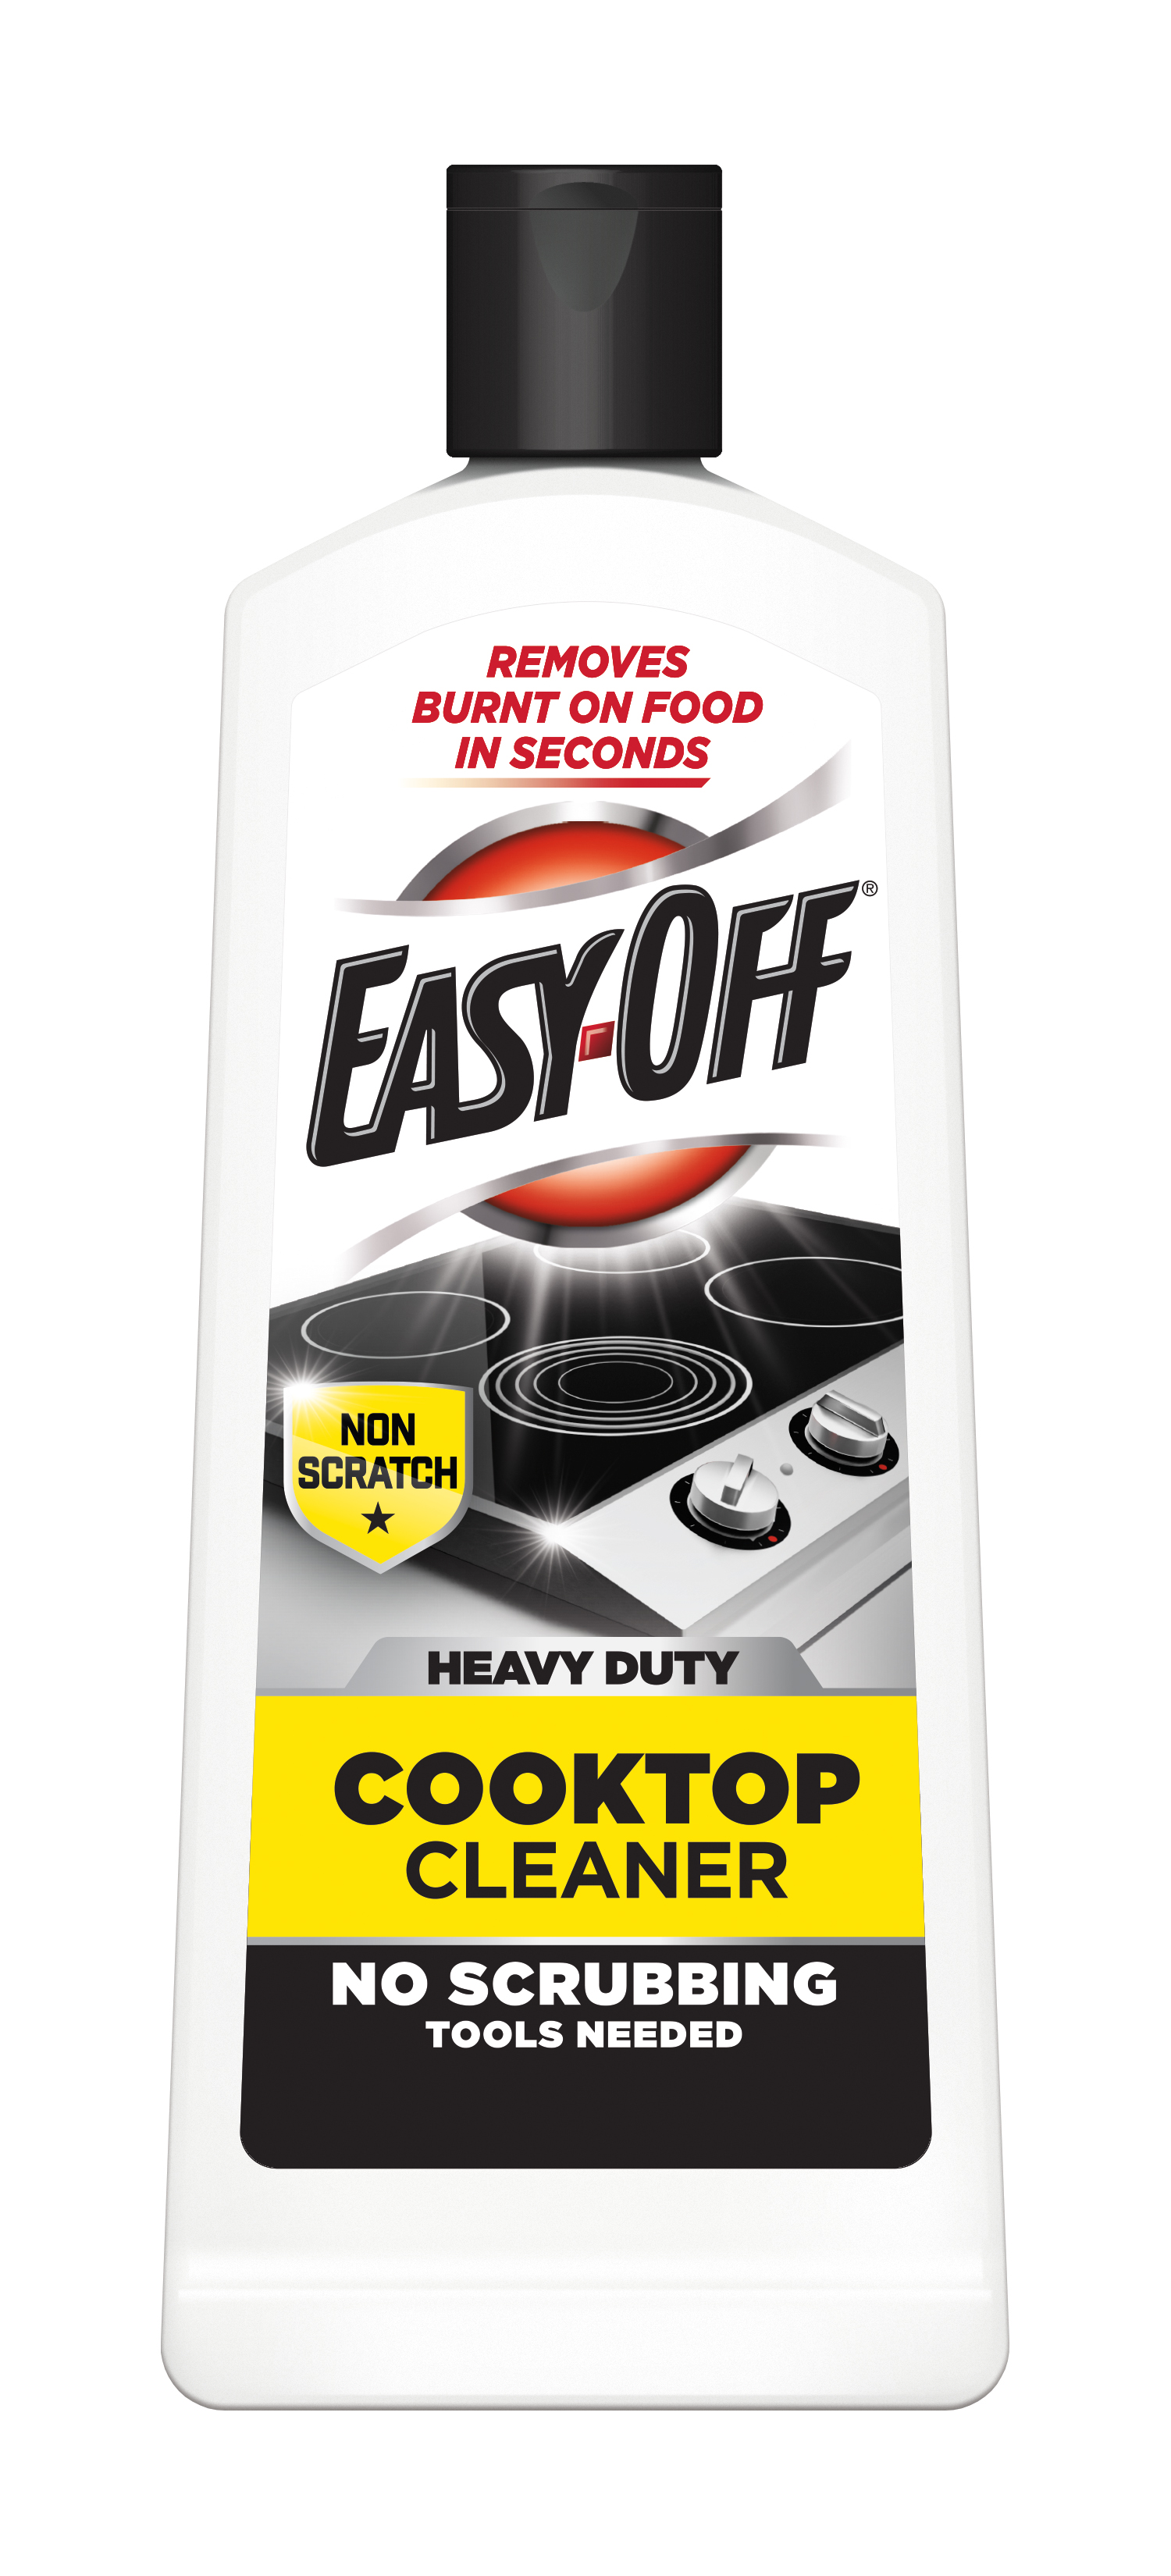 EasyOff Heavy Duty Cooktop Cleaner